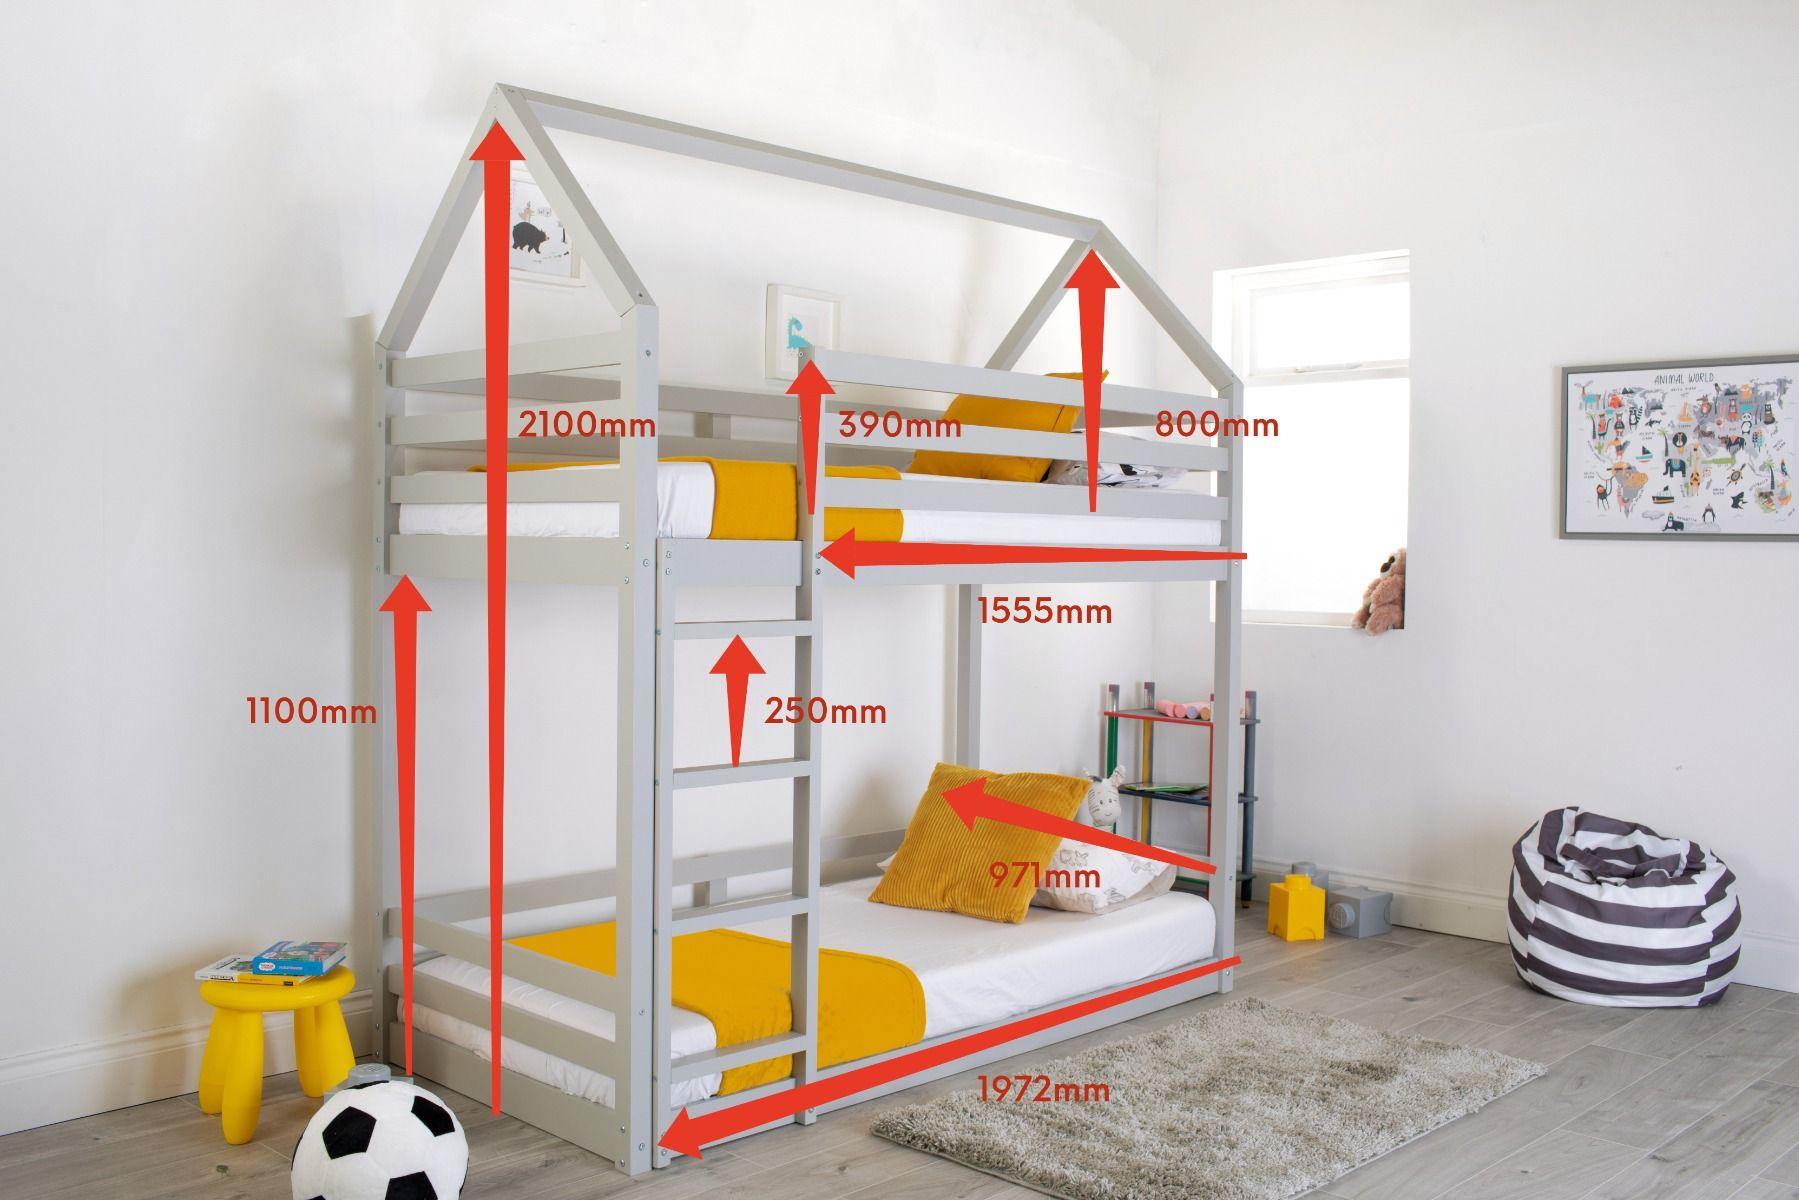 Flair Play House Bunk Bed Frame White Pine Wood Measurement